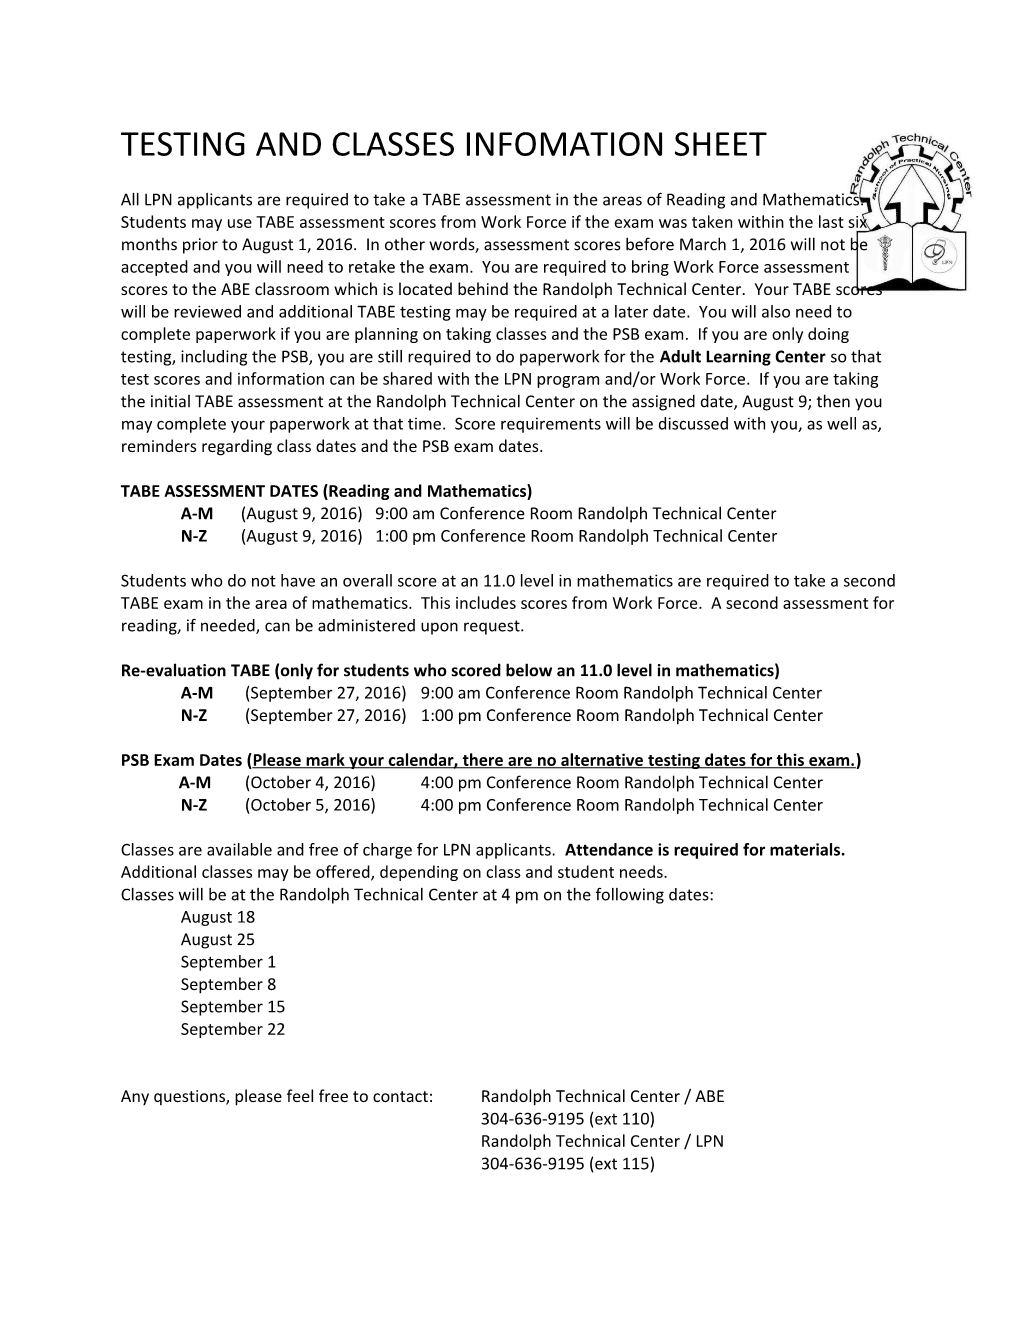 TABE ASSESSMENT DATES (Reading and Mathematics)